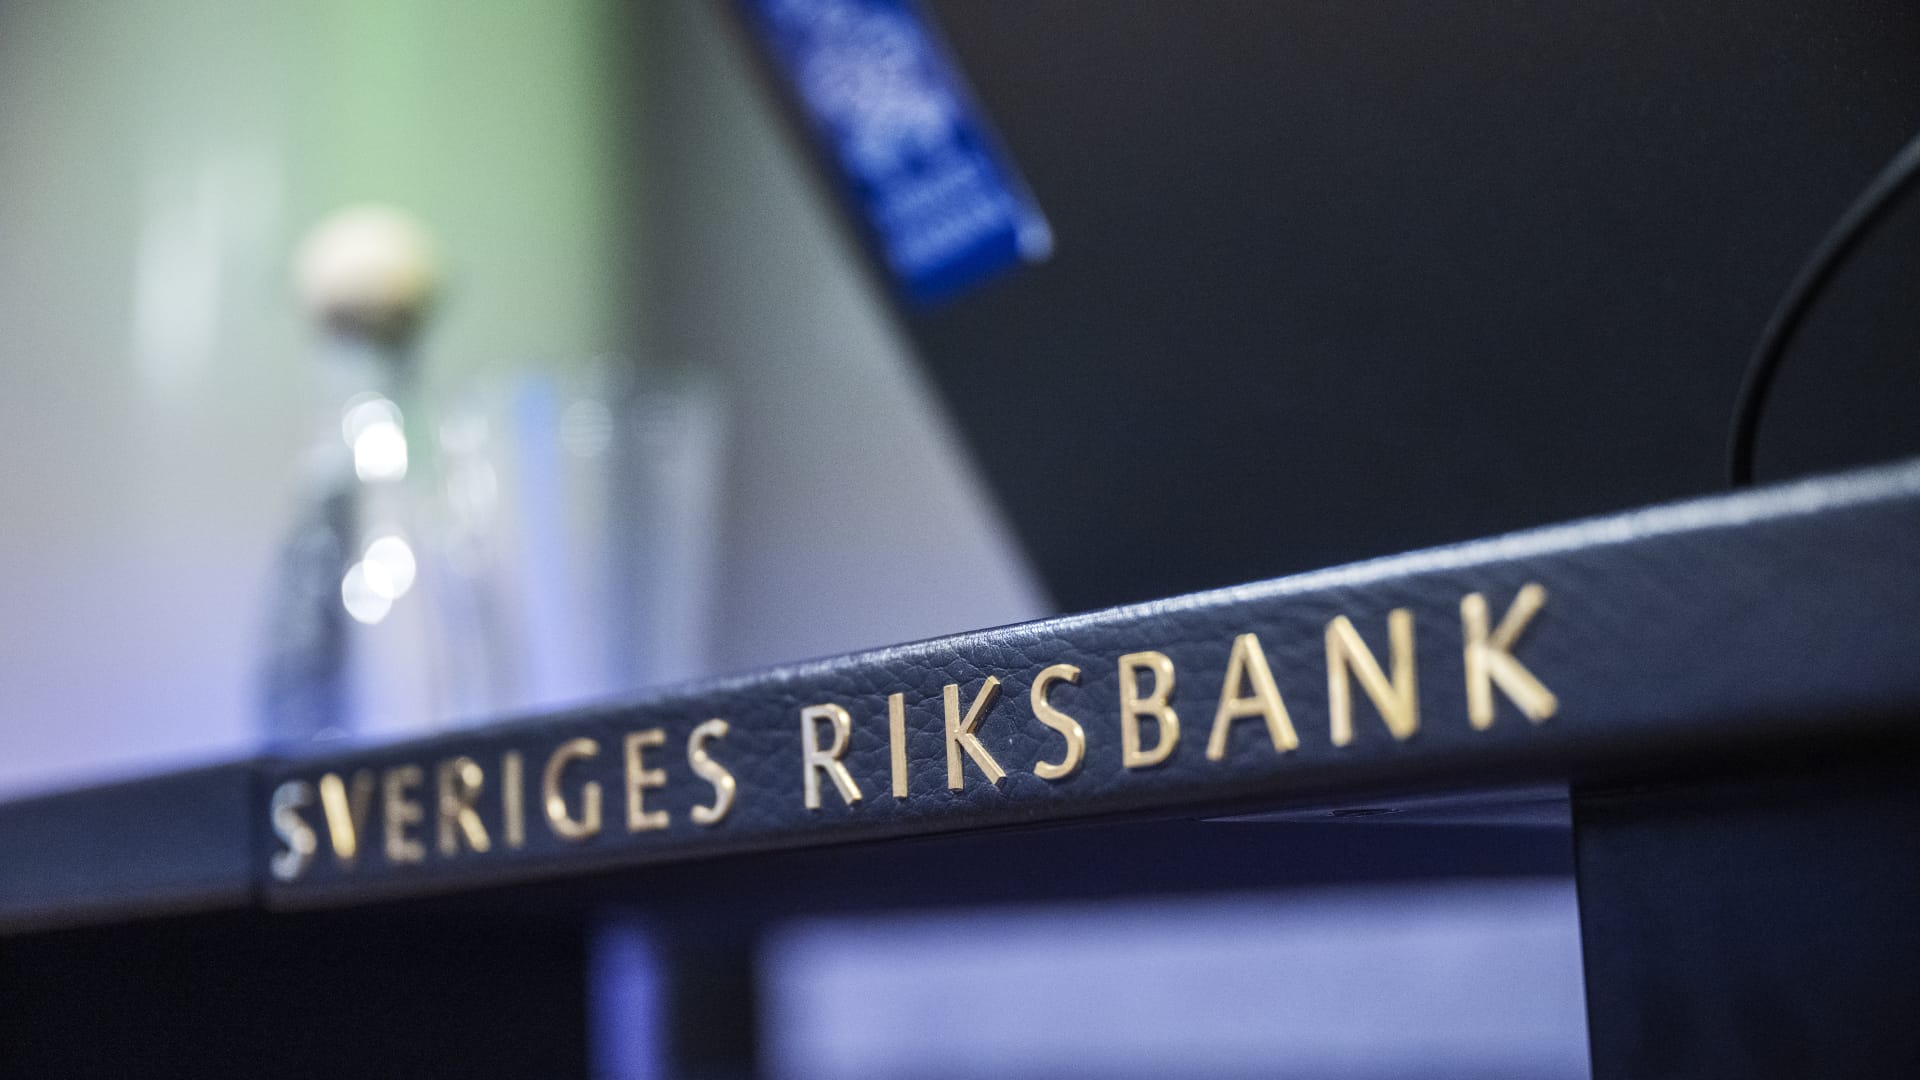 Sweden’s central bank launches 100 basis point rate hike